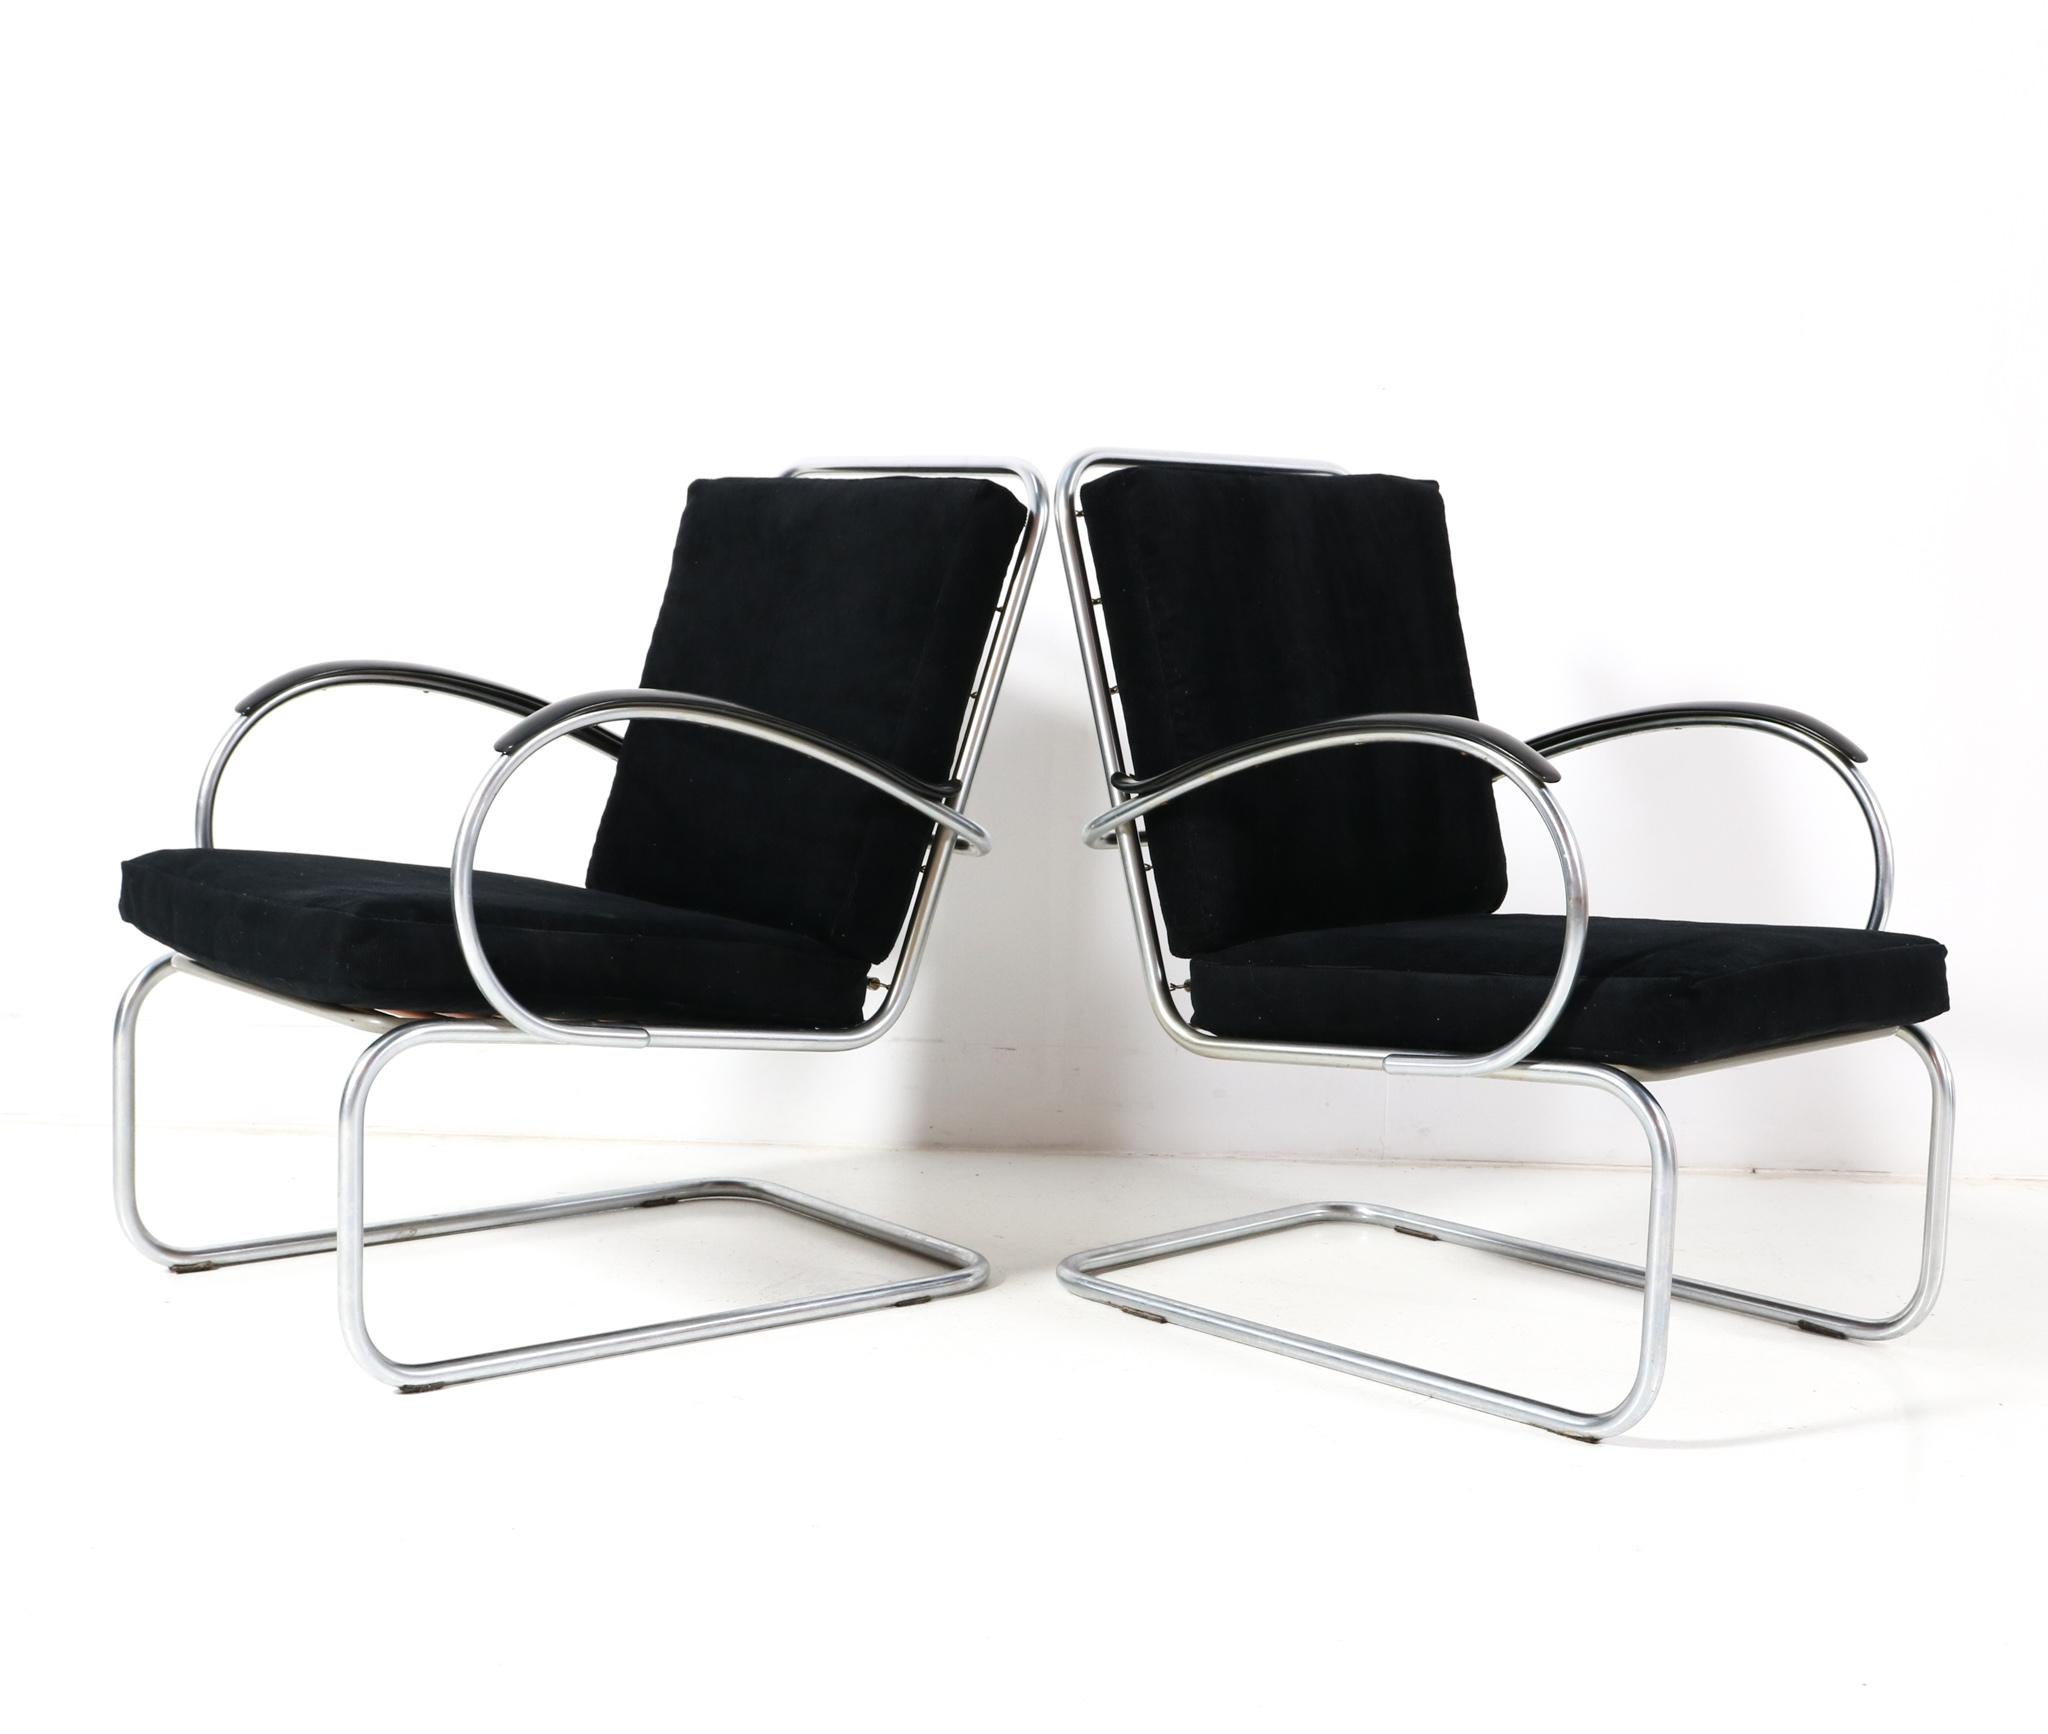 Dutch Two Art Deco Bauhaus Model 409 Lounge Chairs by W.H. Gispen for Gispen, 1930s For Sale